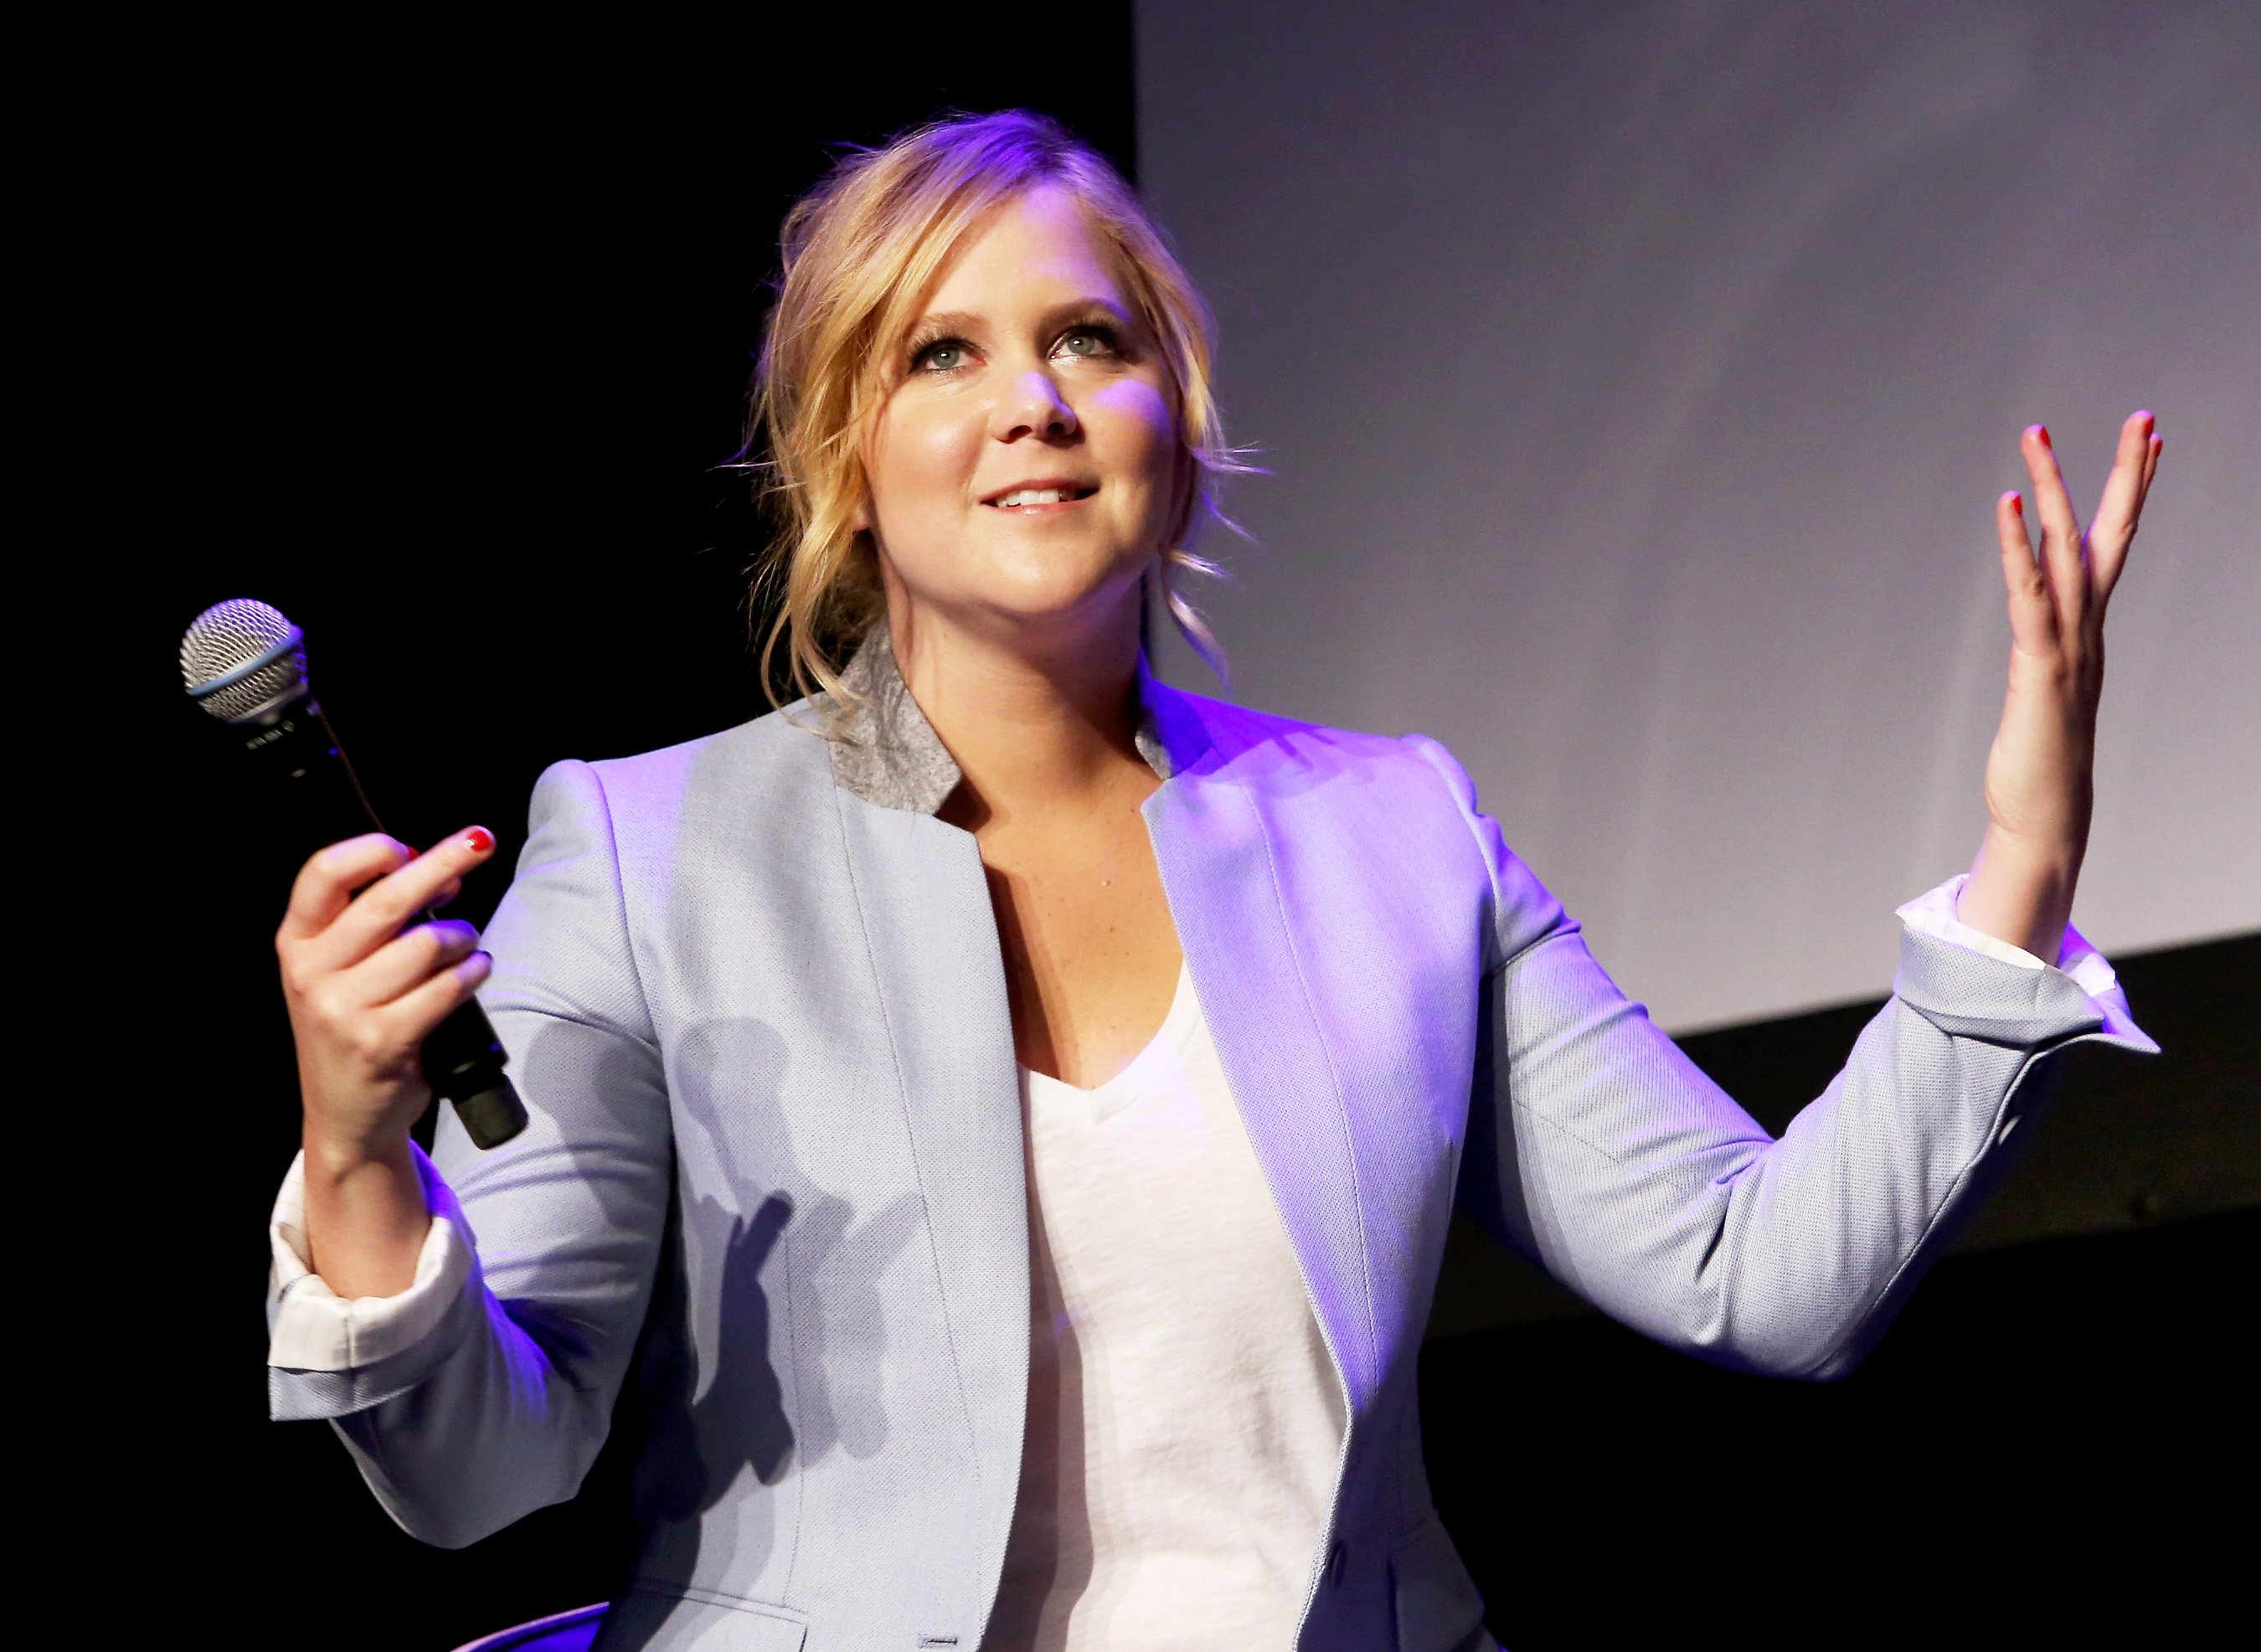 Amy Schumer speaks during the "Tribeca Talks: After the Movie: Inside Amy Schumer" during the 2015 Tribeca Film Festival at Spring Studio on April 19, 2015 in New York City. | Photo: Getty Images